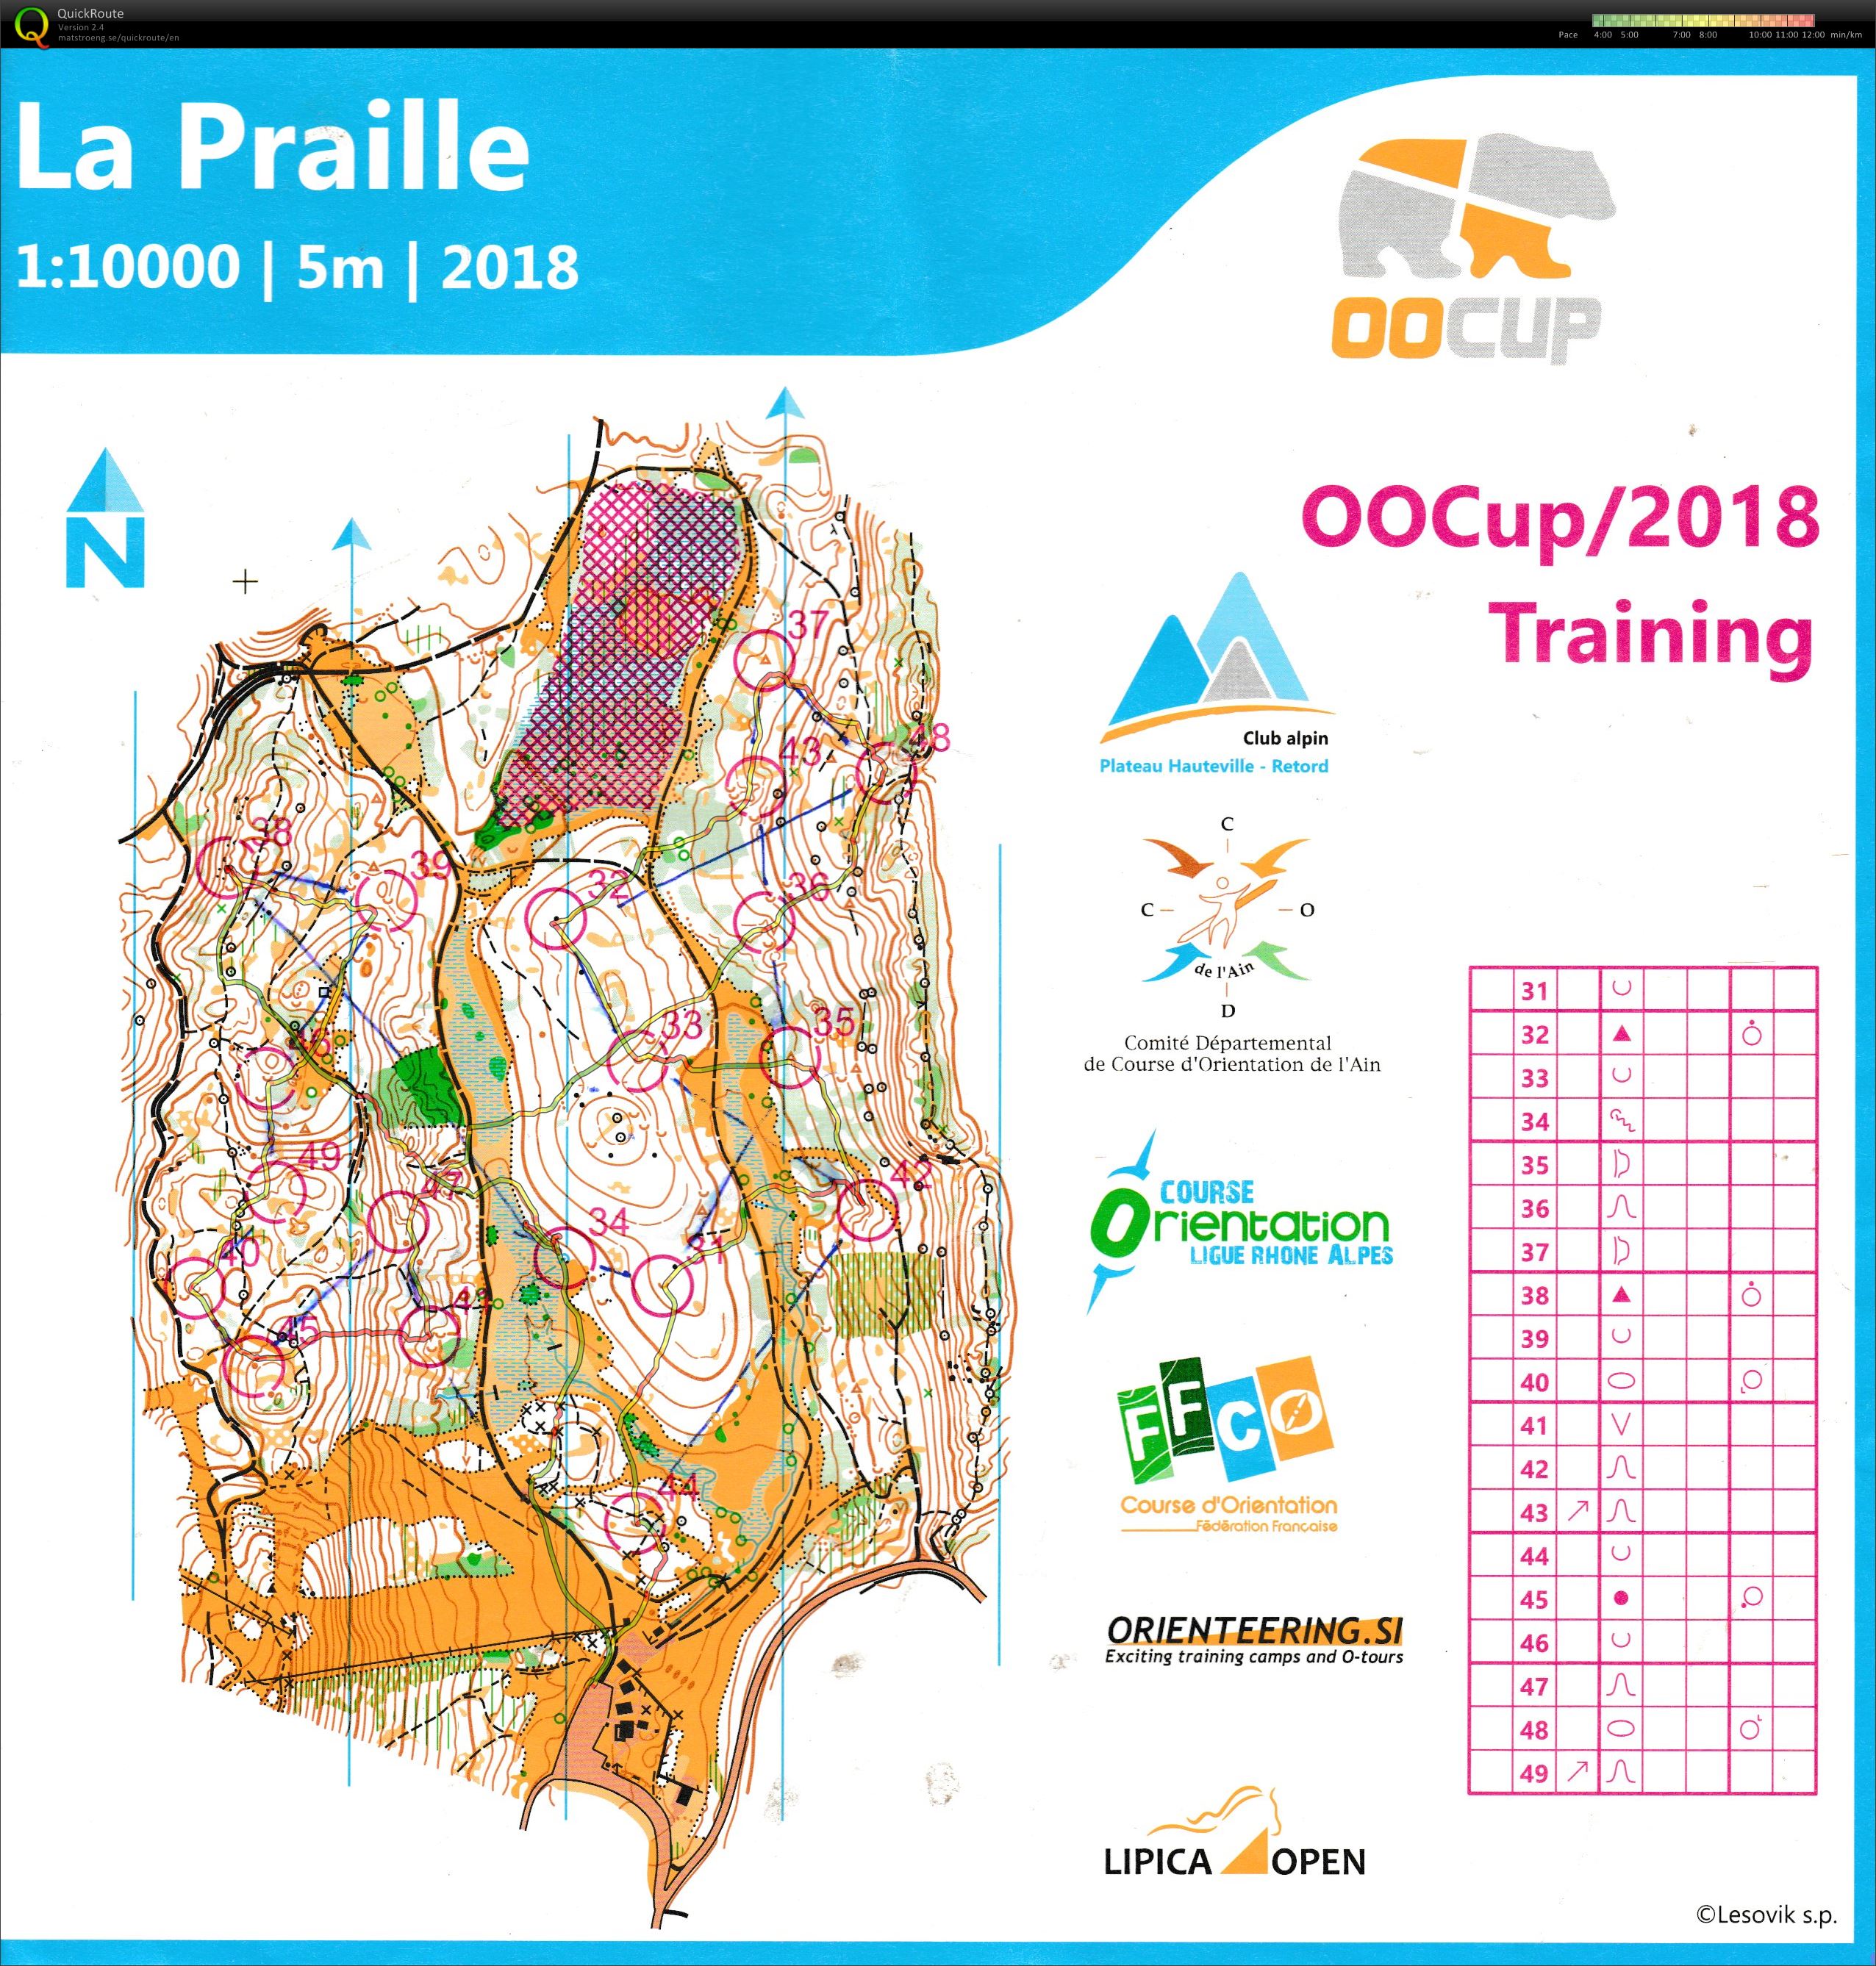 OOCup Training (23/07/2018)